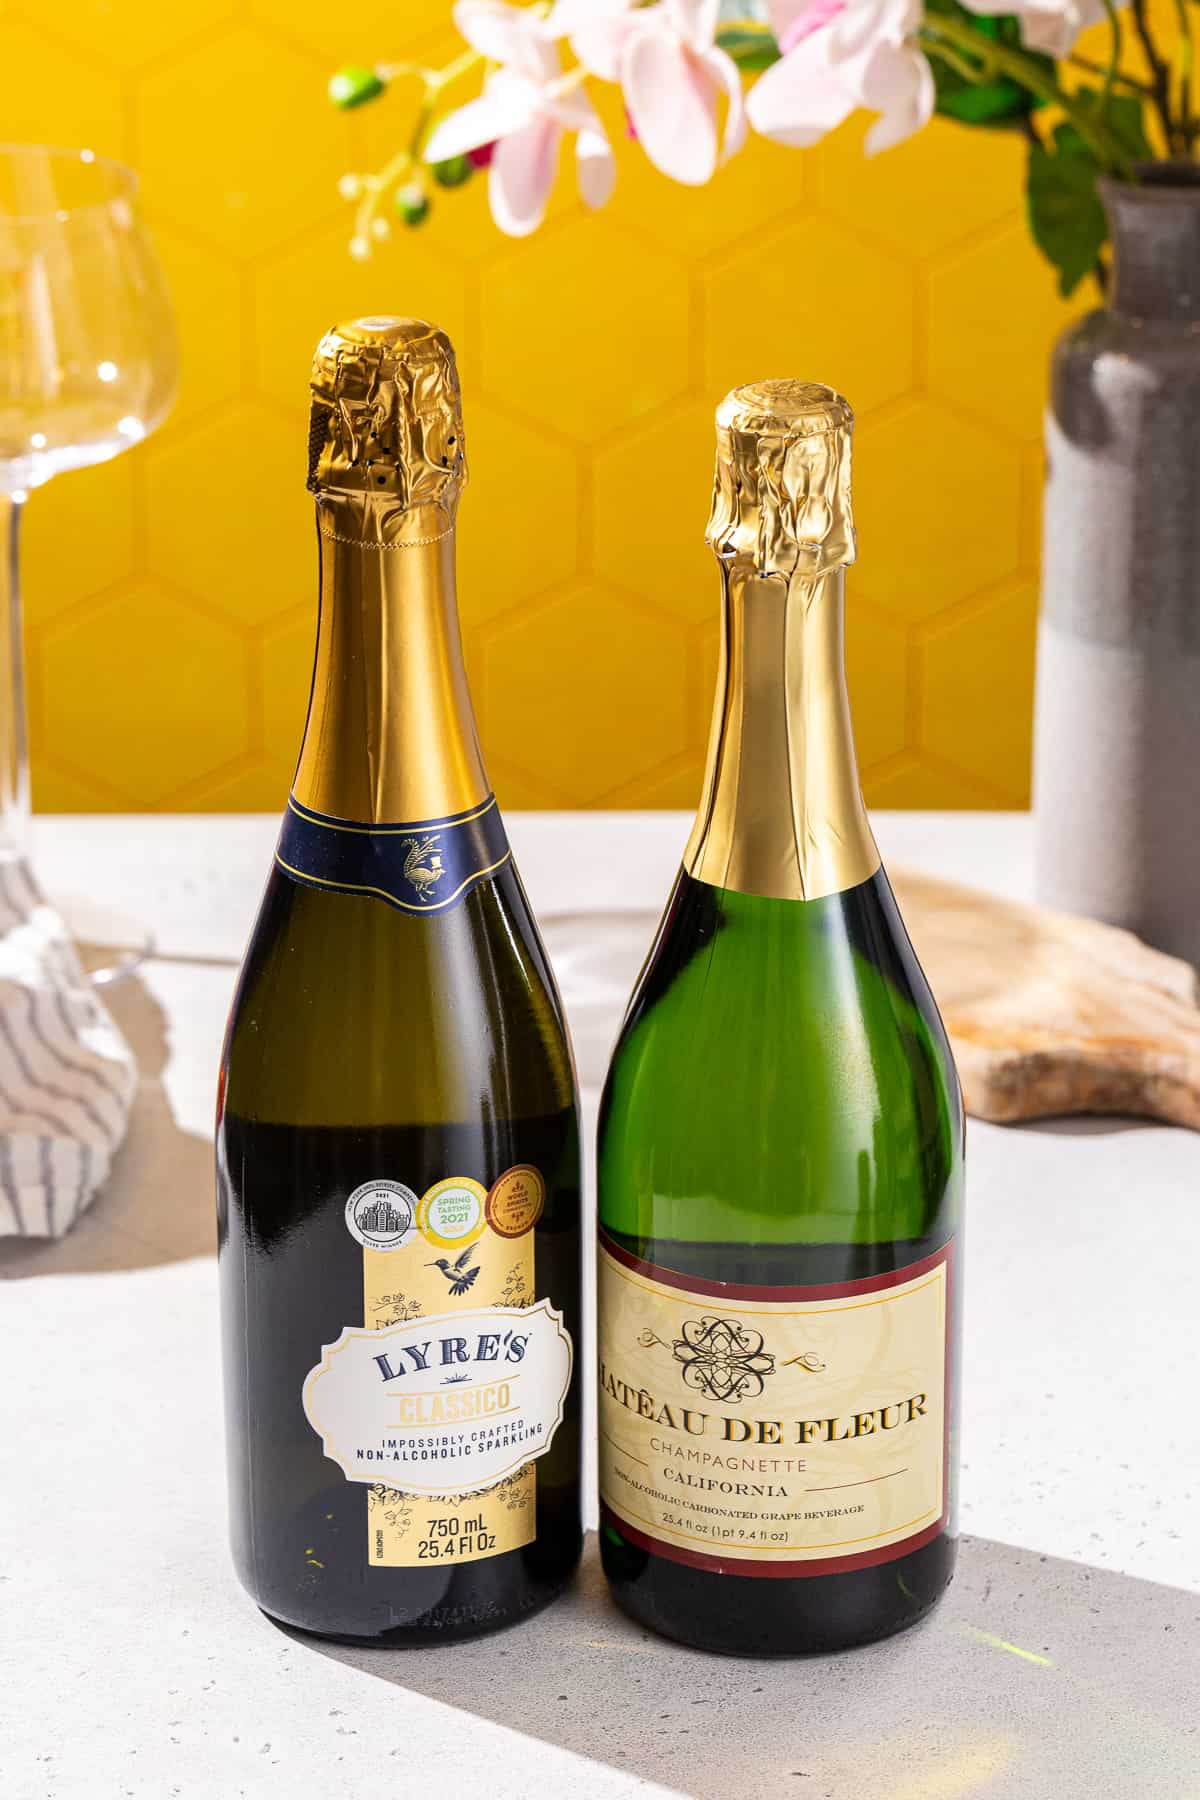 Two bottles of non-alcoholic sparkling wine made by different brands.